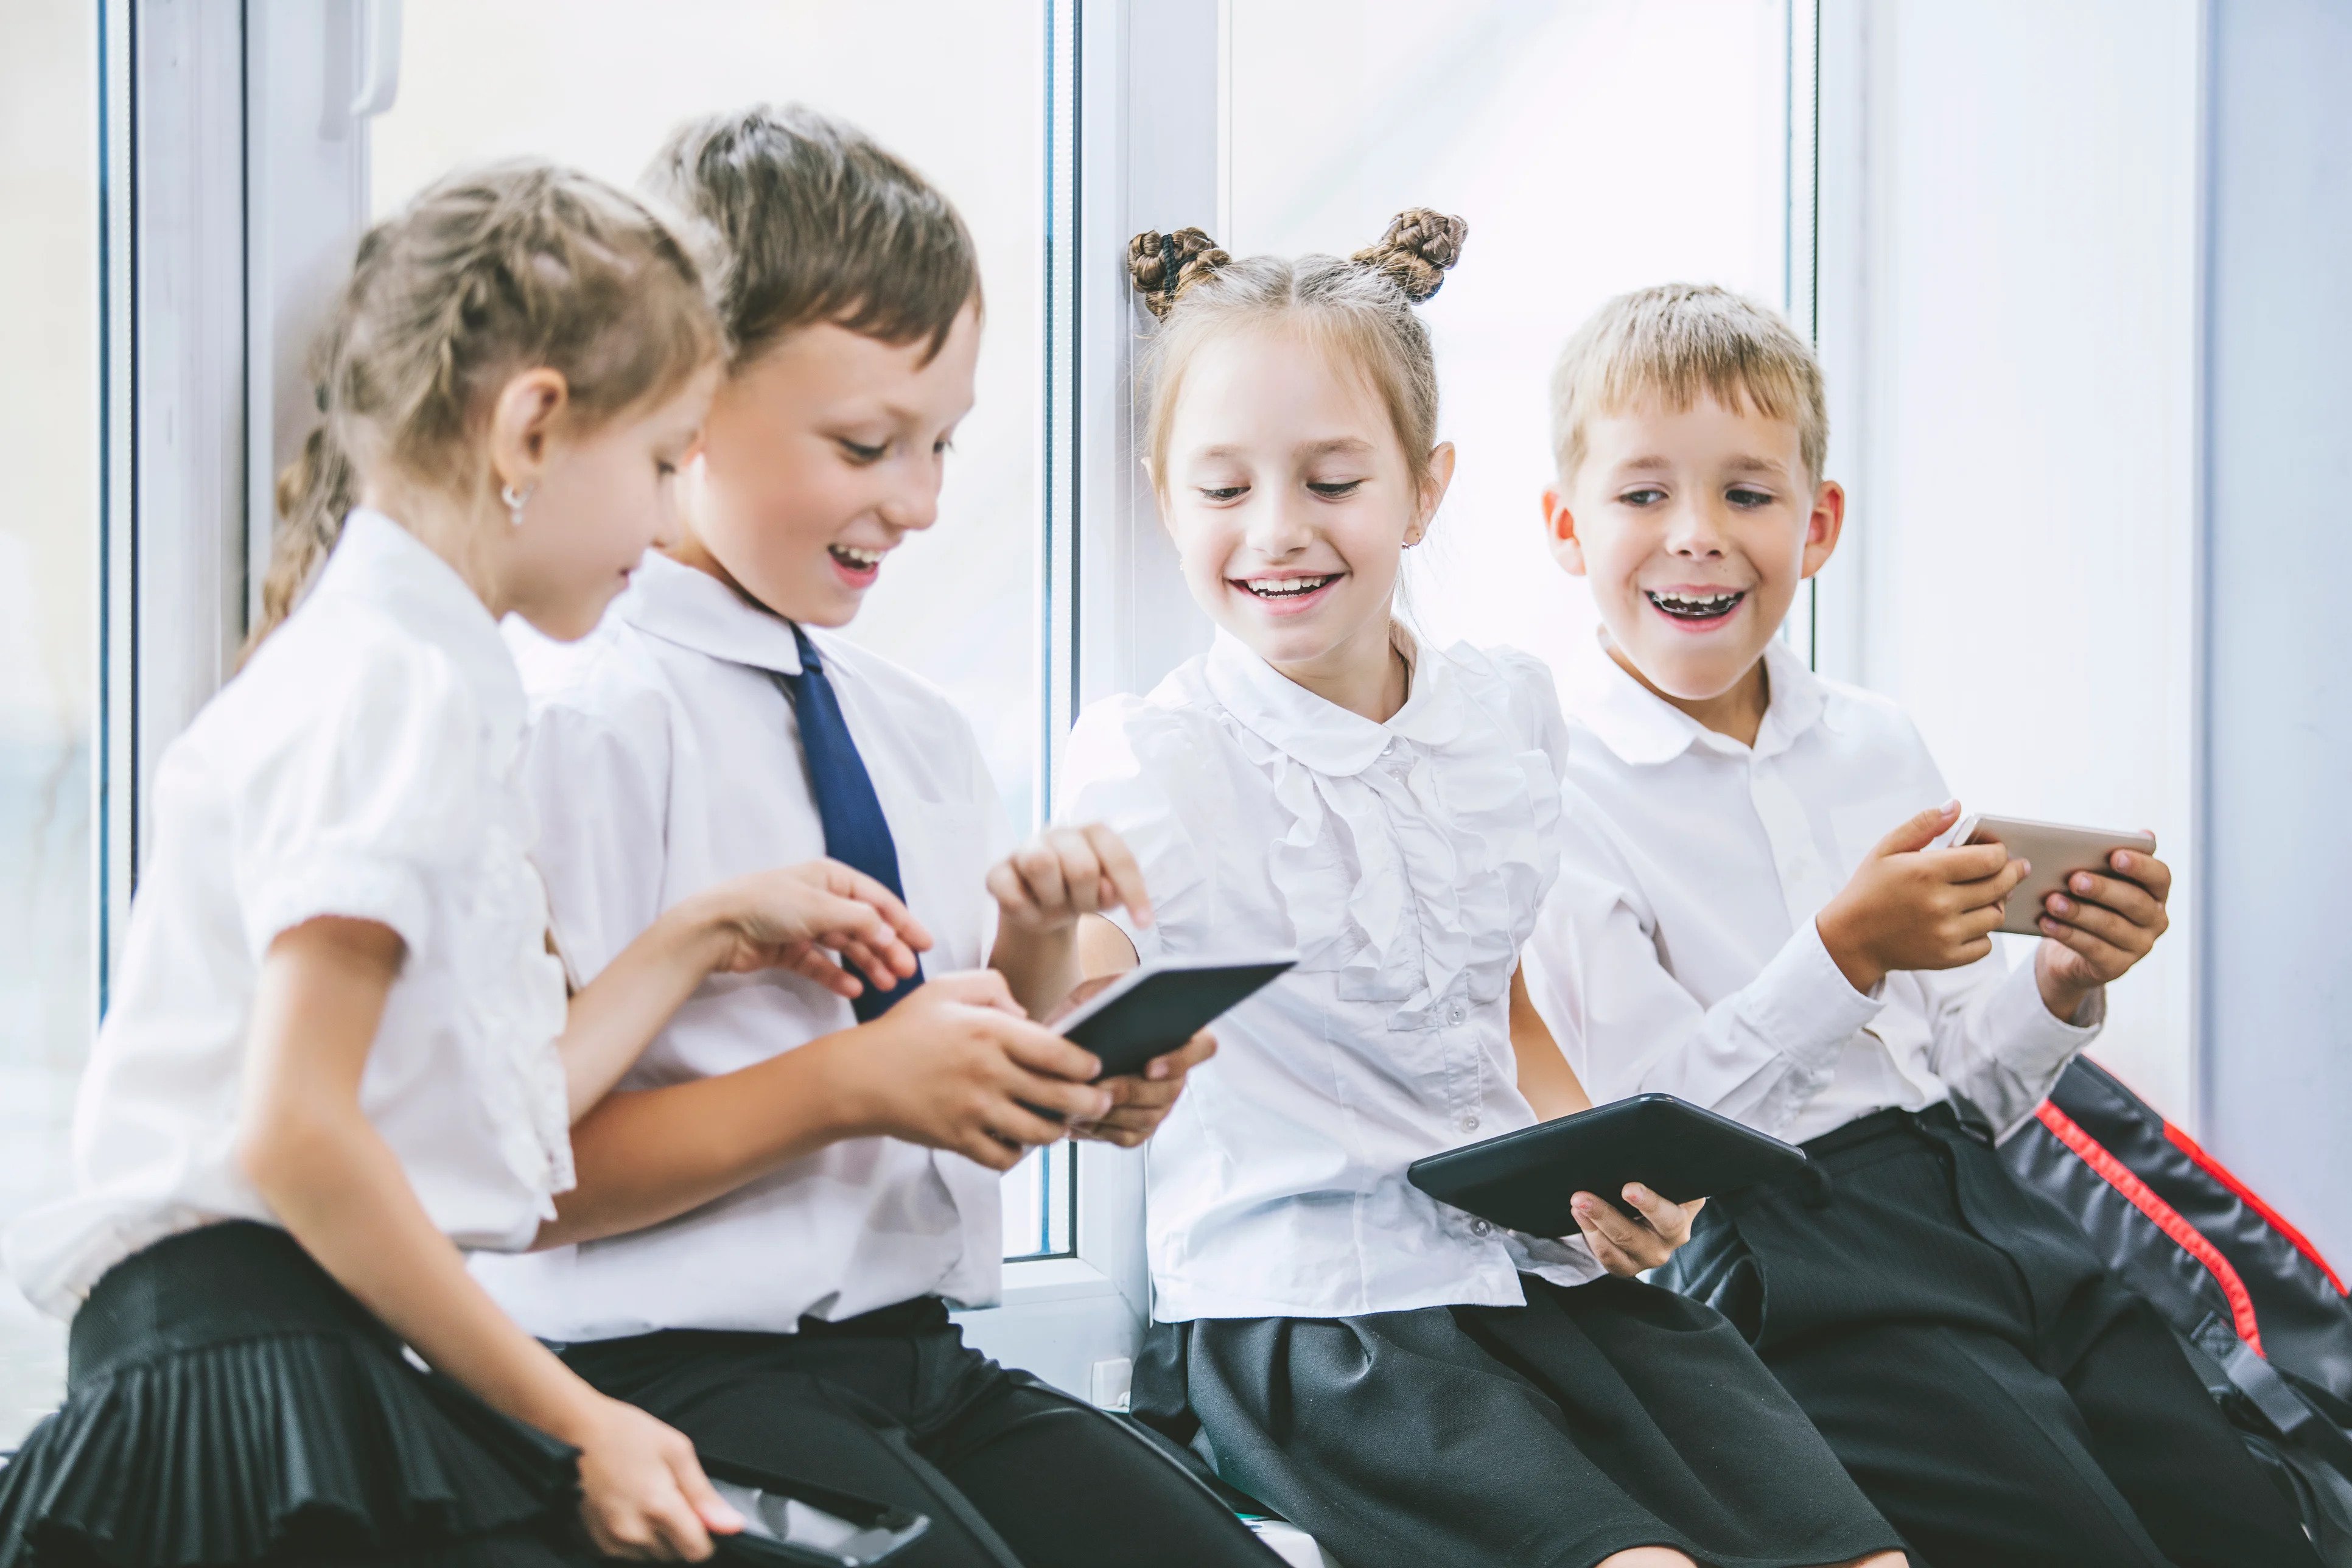 private school students sitting together using their devices